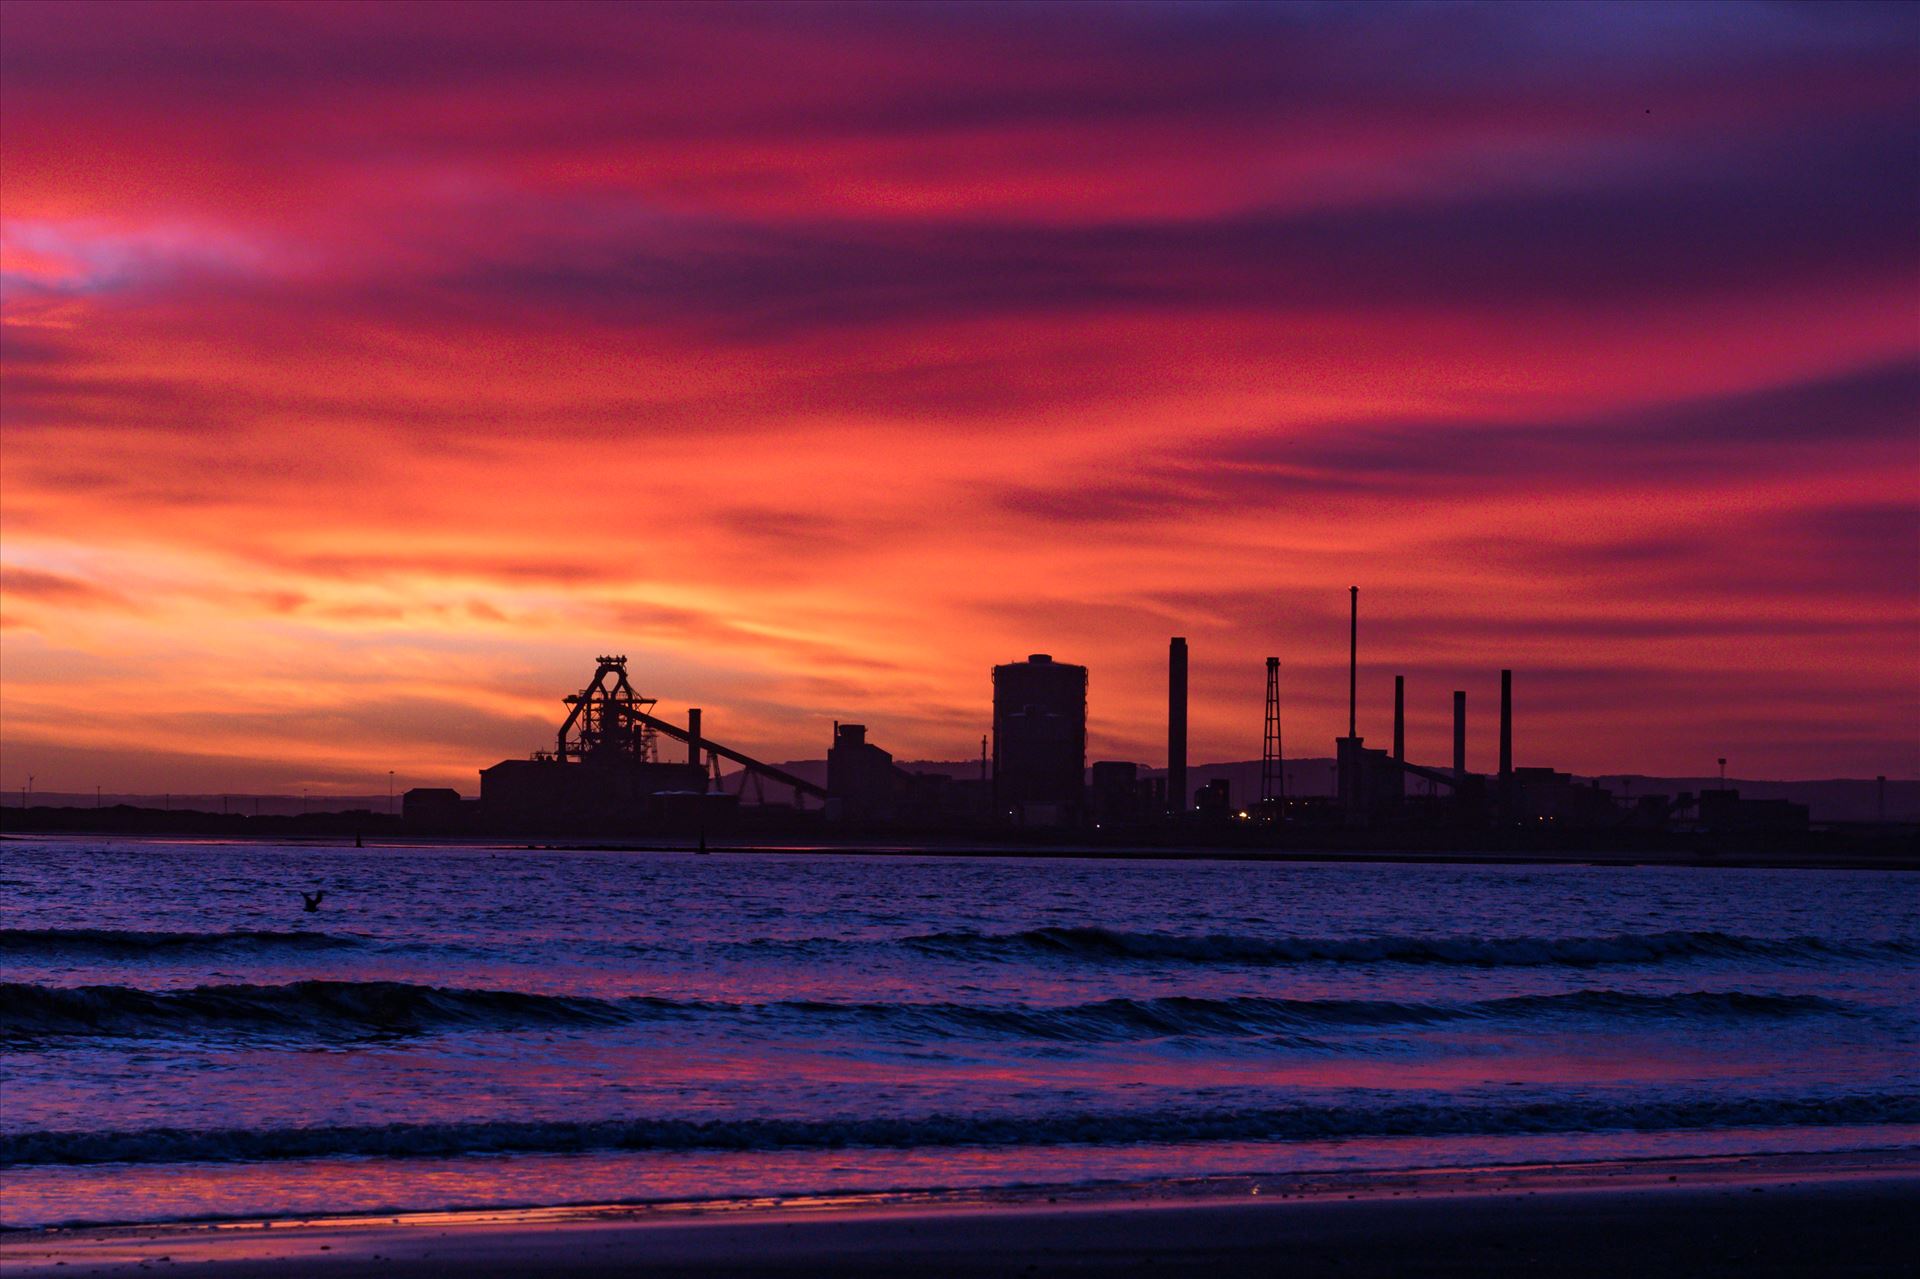 SSI Redcar Steel Works Sunrise, Red sky in the Morning Taken on the 2/01/18 on a very cold Seaton Beach looking over the river to SSI Redcar Steel Works by AJ Stoves Photography